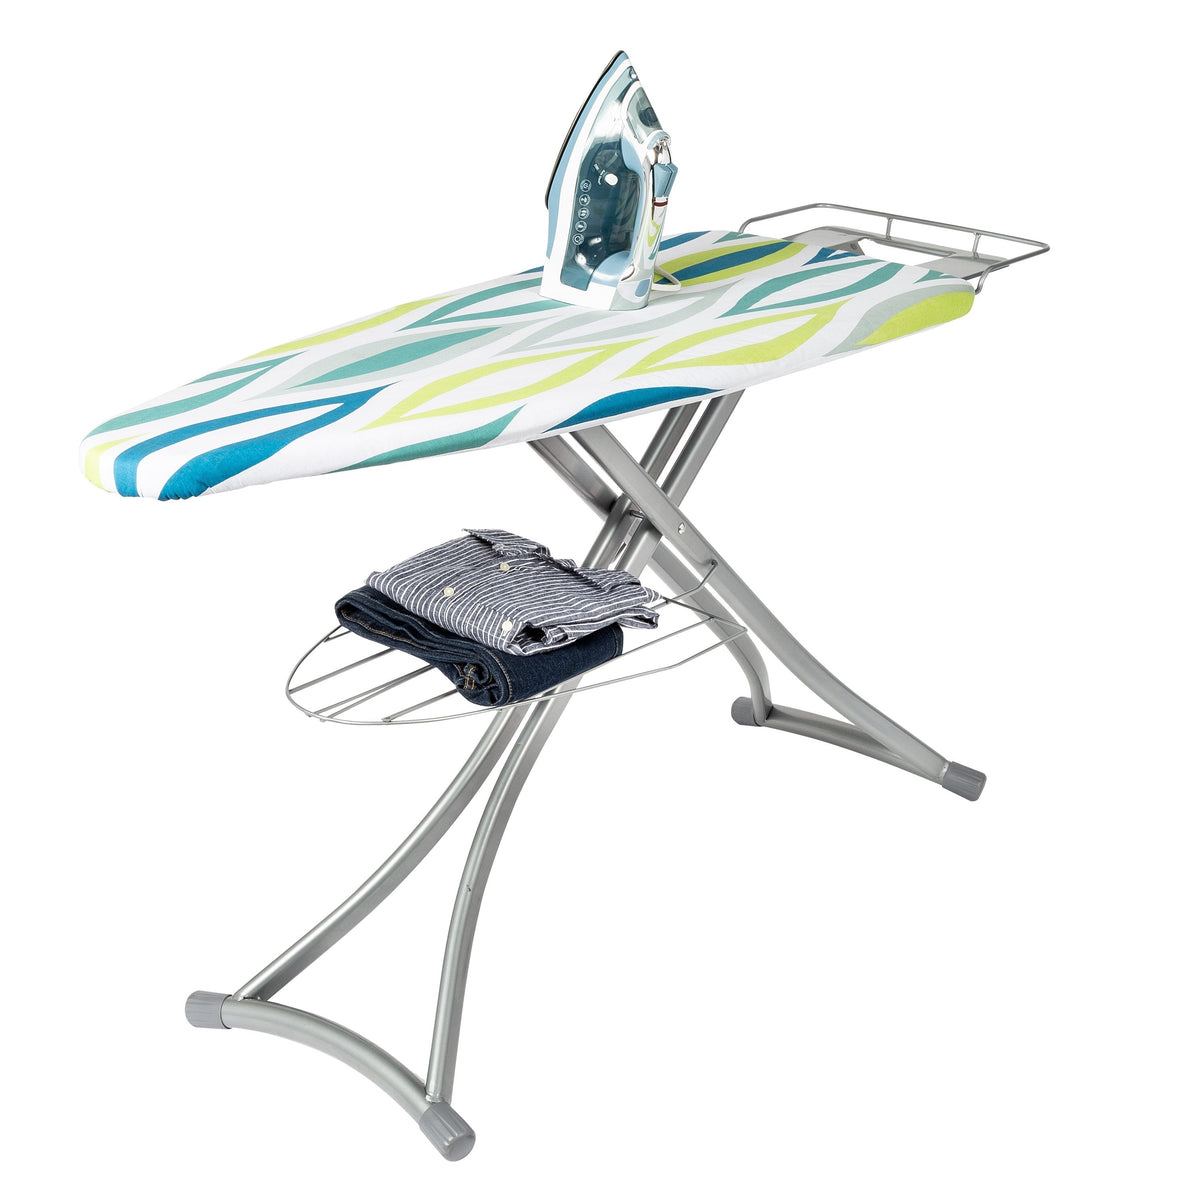 BKTD Foldable Ironing Board with Heat Resistant Cover, Steam Iron Rest and  Non-Slip Legs - Sturdy Metal Frame (13 x 34 x 53 Inches) (Silver Gray)